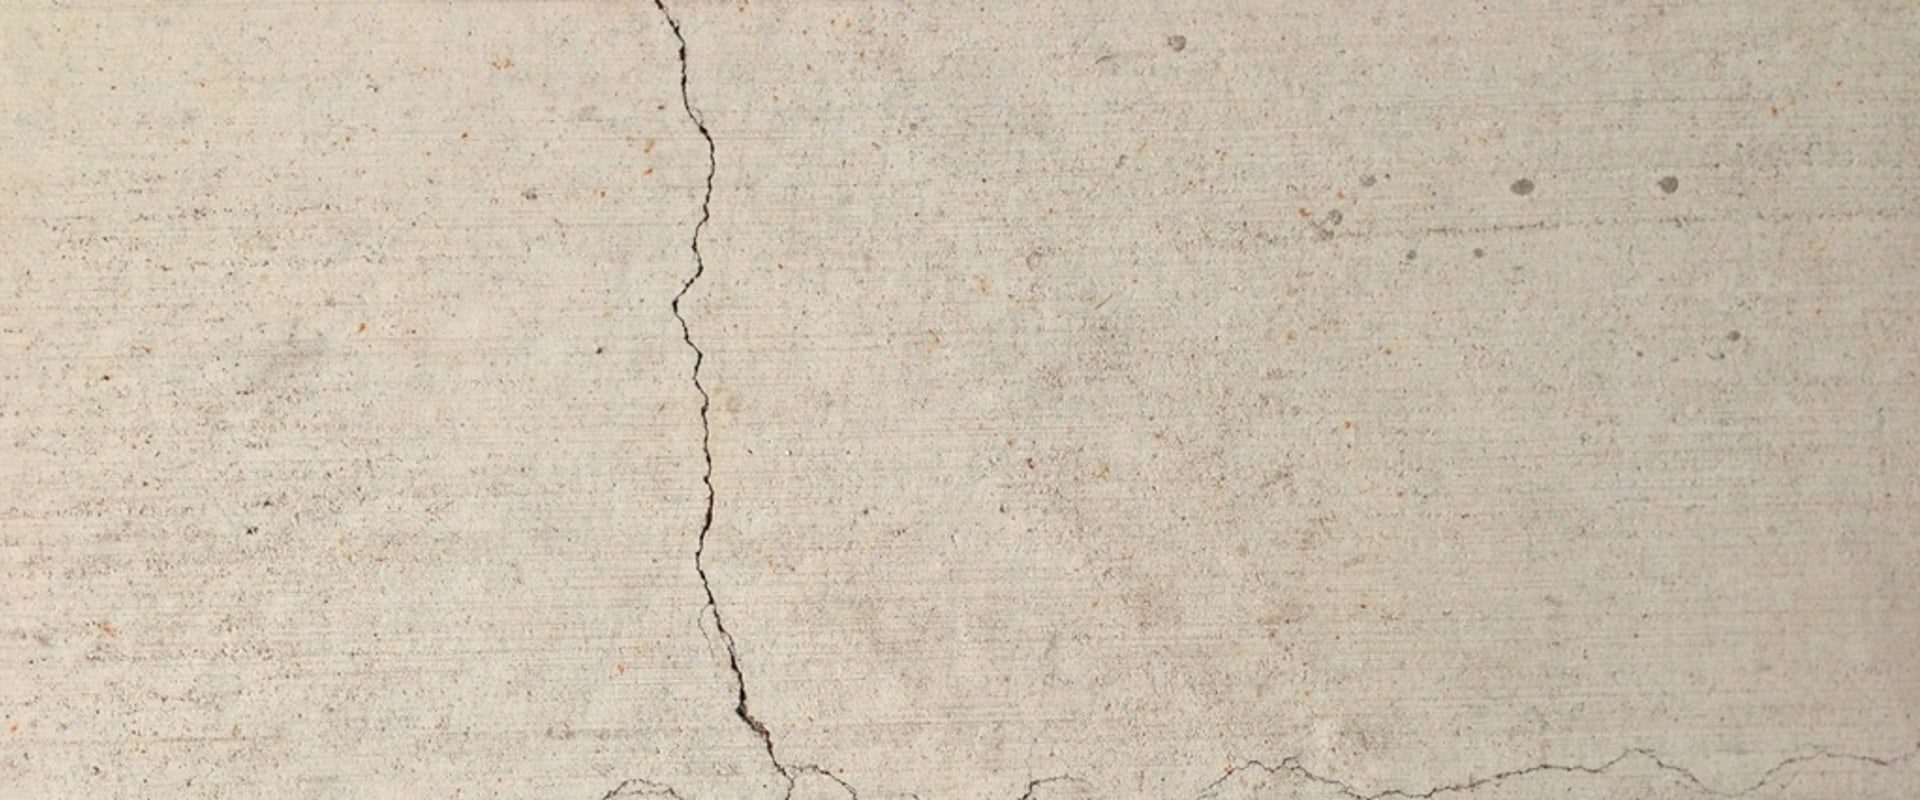 Can fine cracks in concrete be repaired?